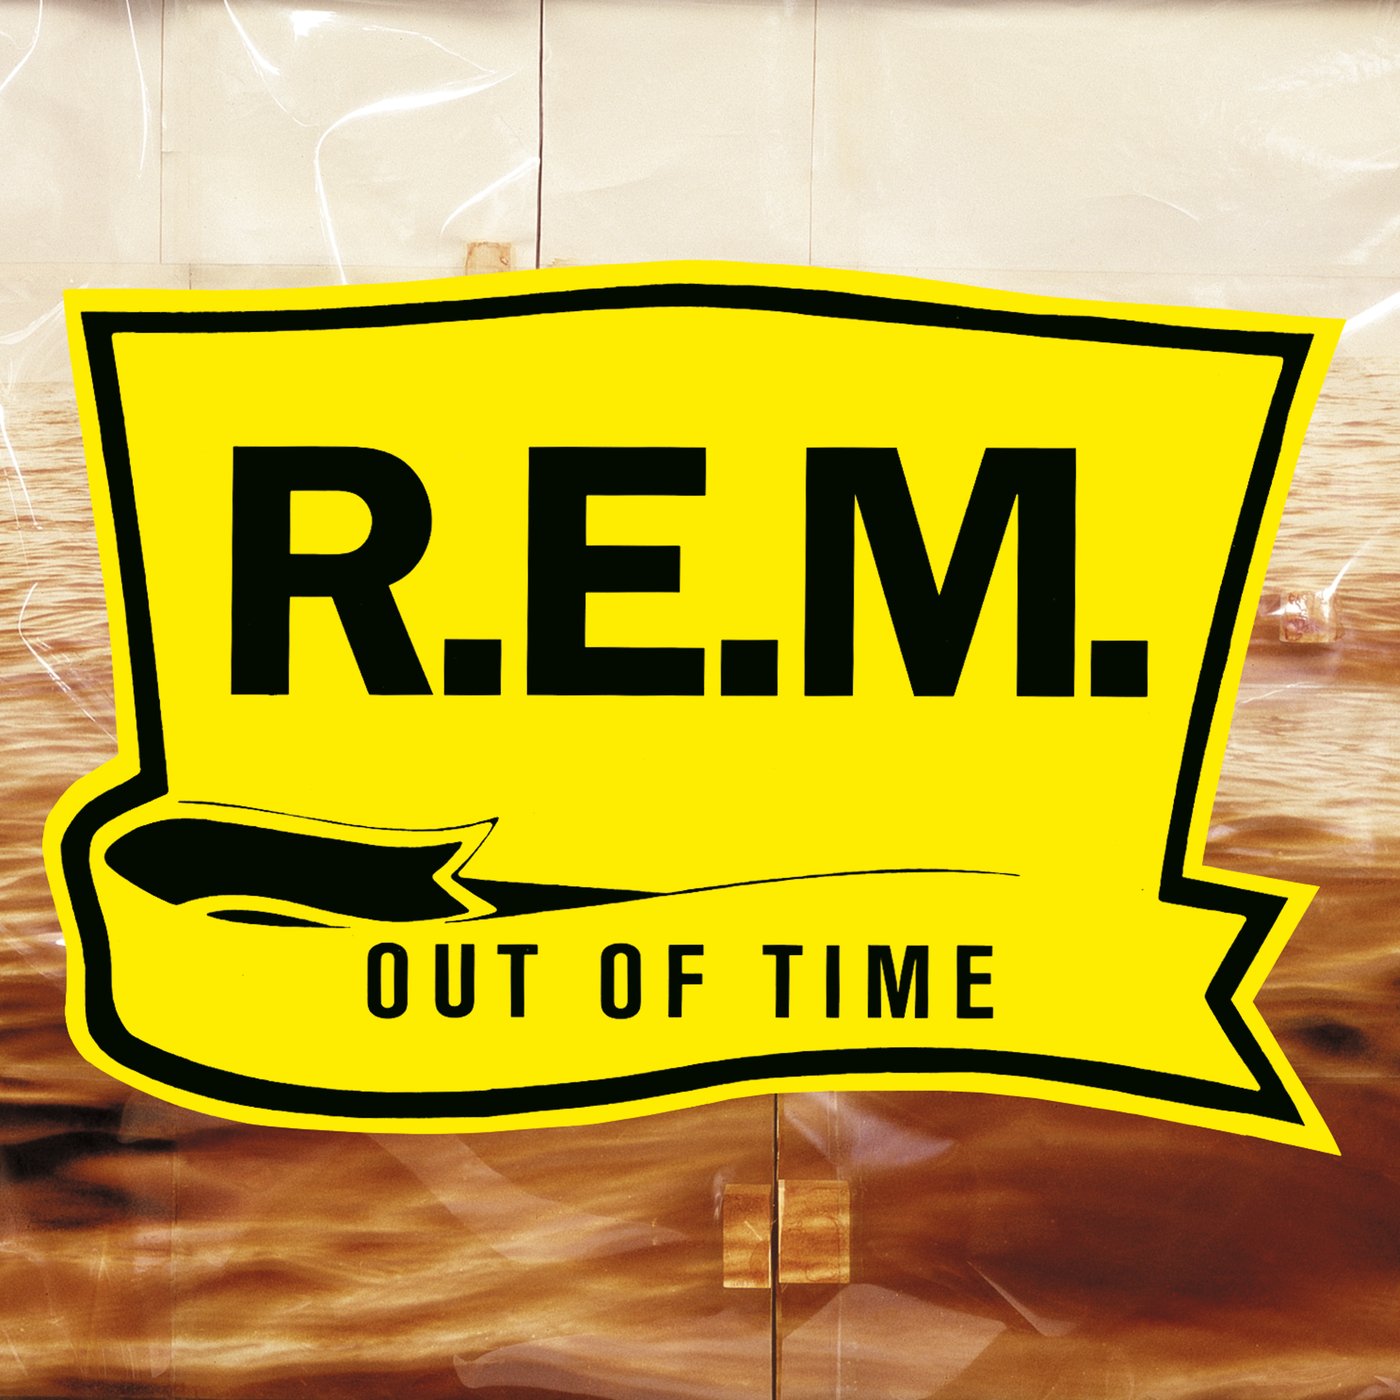 R.E.M. "Out of Time" LP